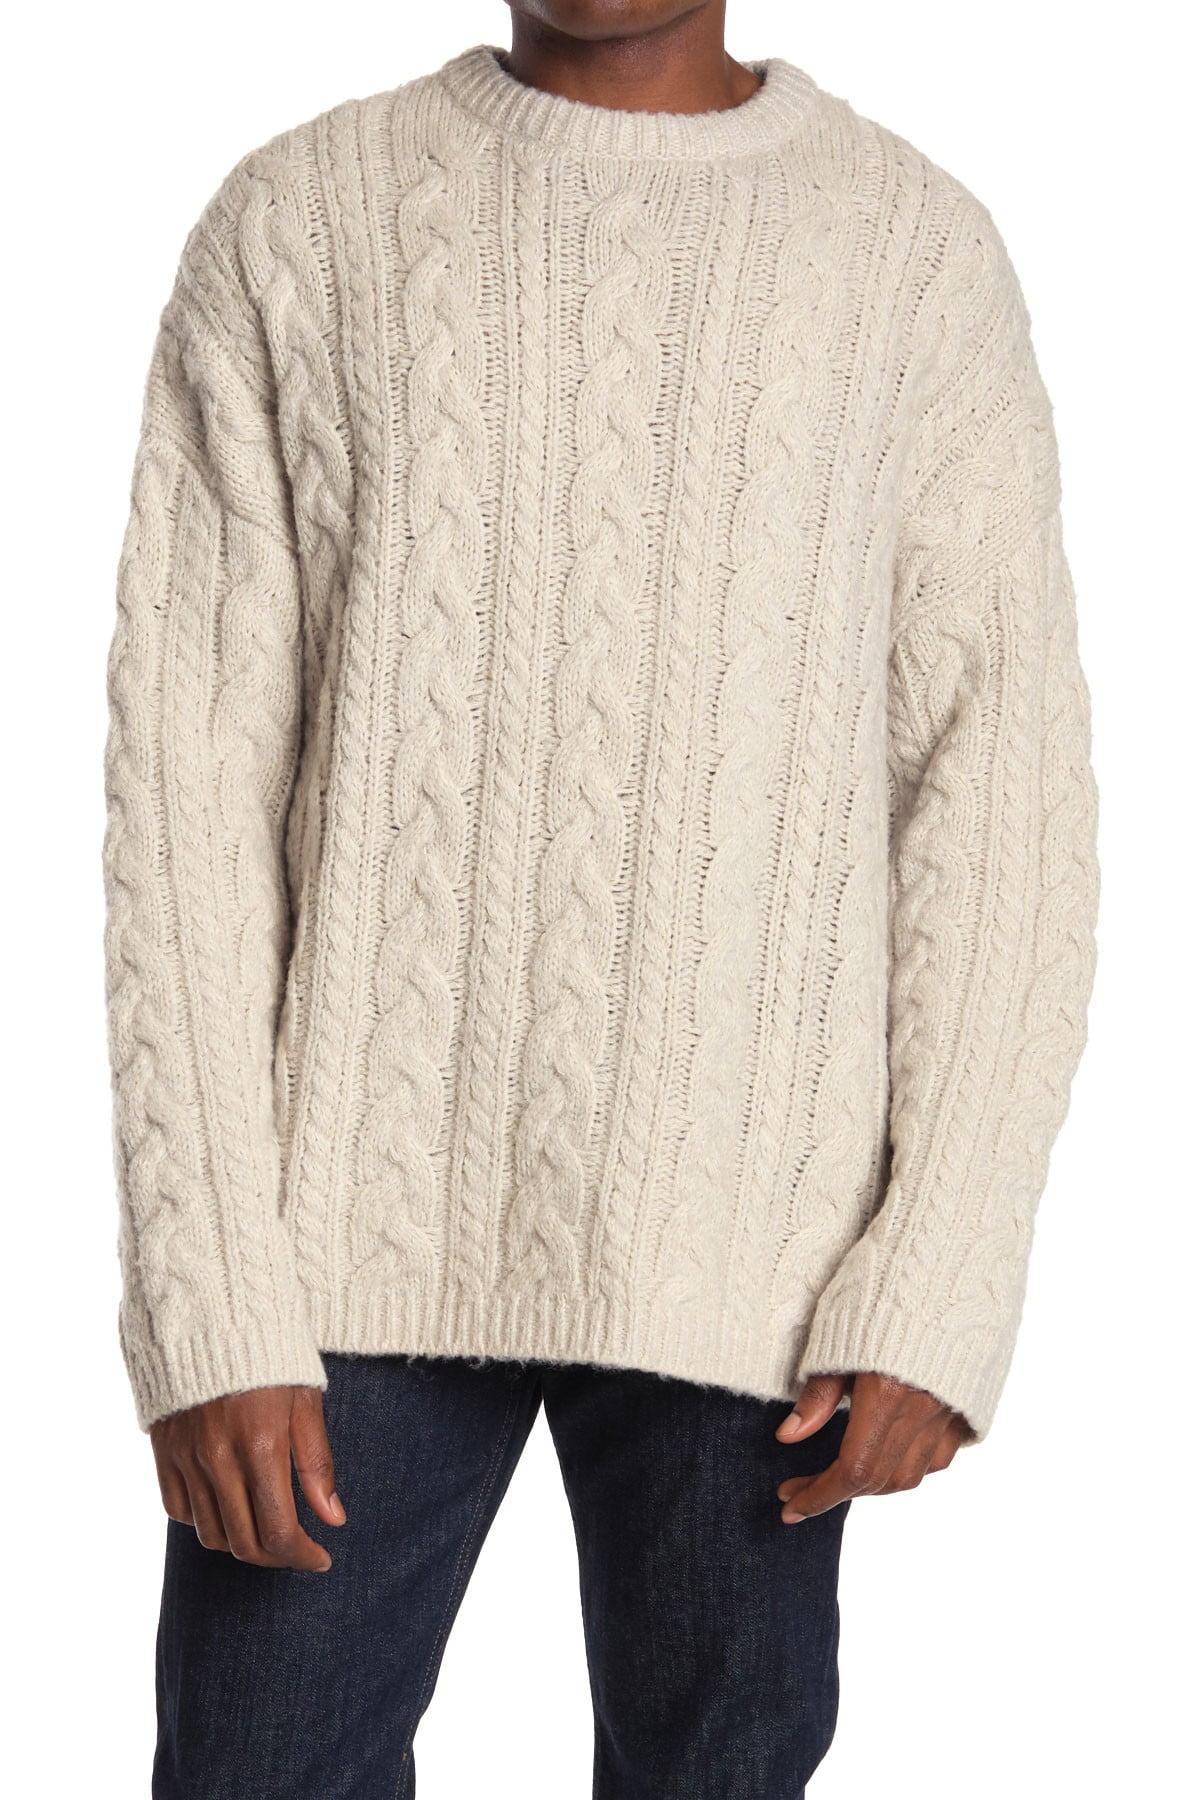 AllSaints Wool Gable Cable Knit Pullover Sweater in Ecru White (Natural)  for Men - Lyst